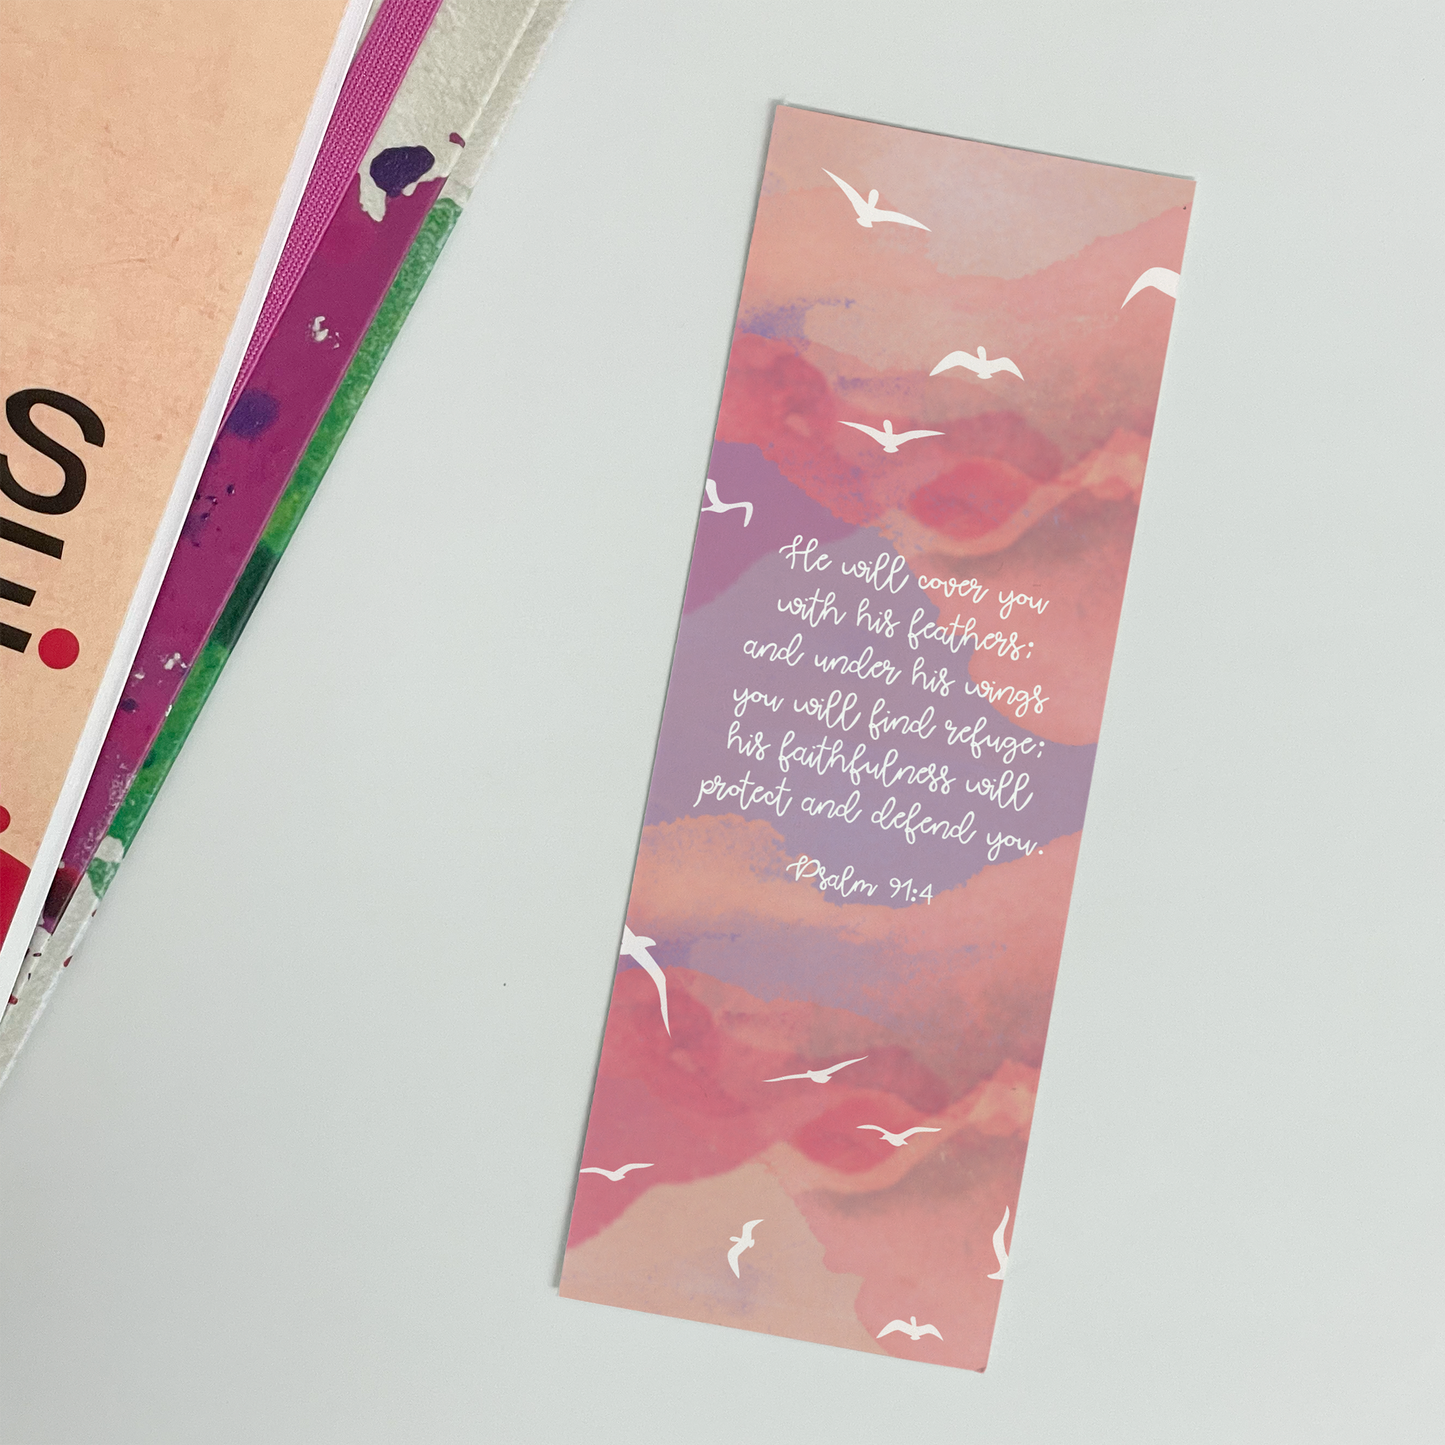 CHRISTIAN BOOKMARK GIFT - PSALM 91:4 - THE WEE SPARROW